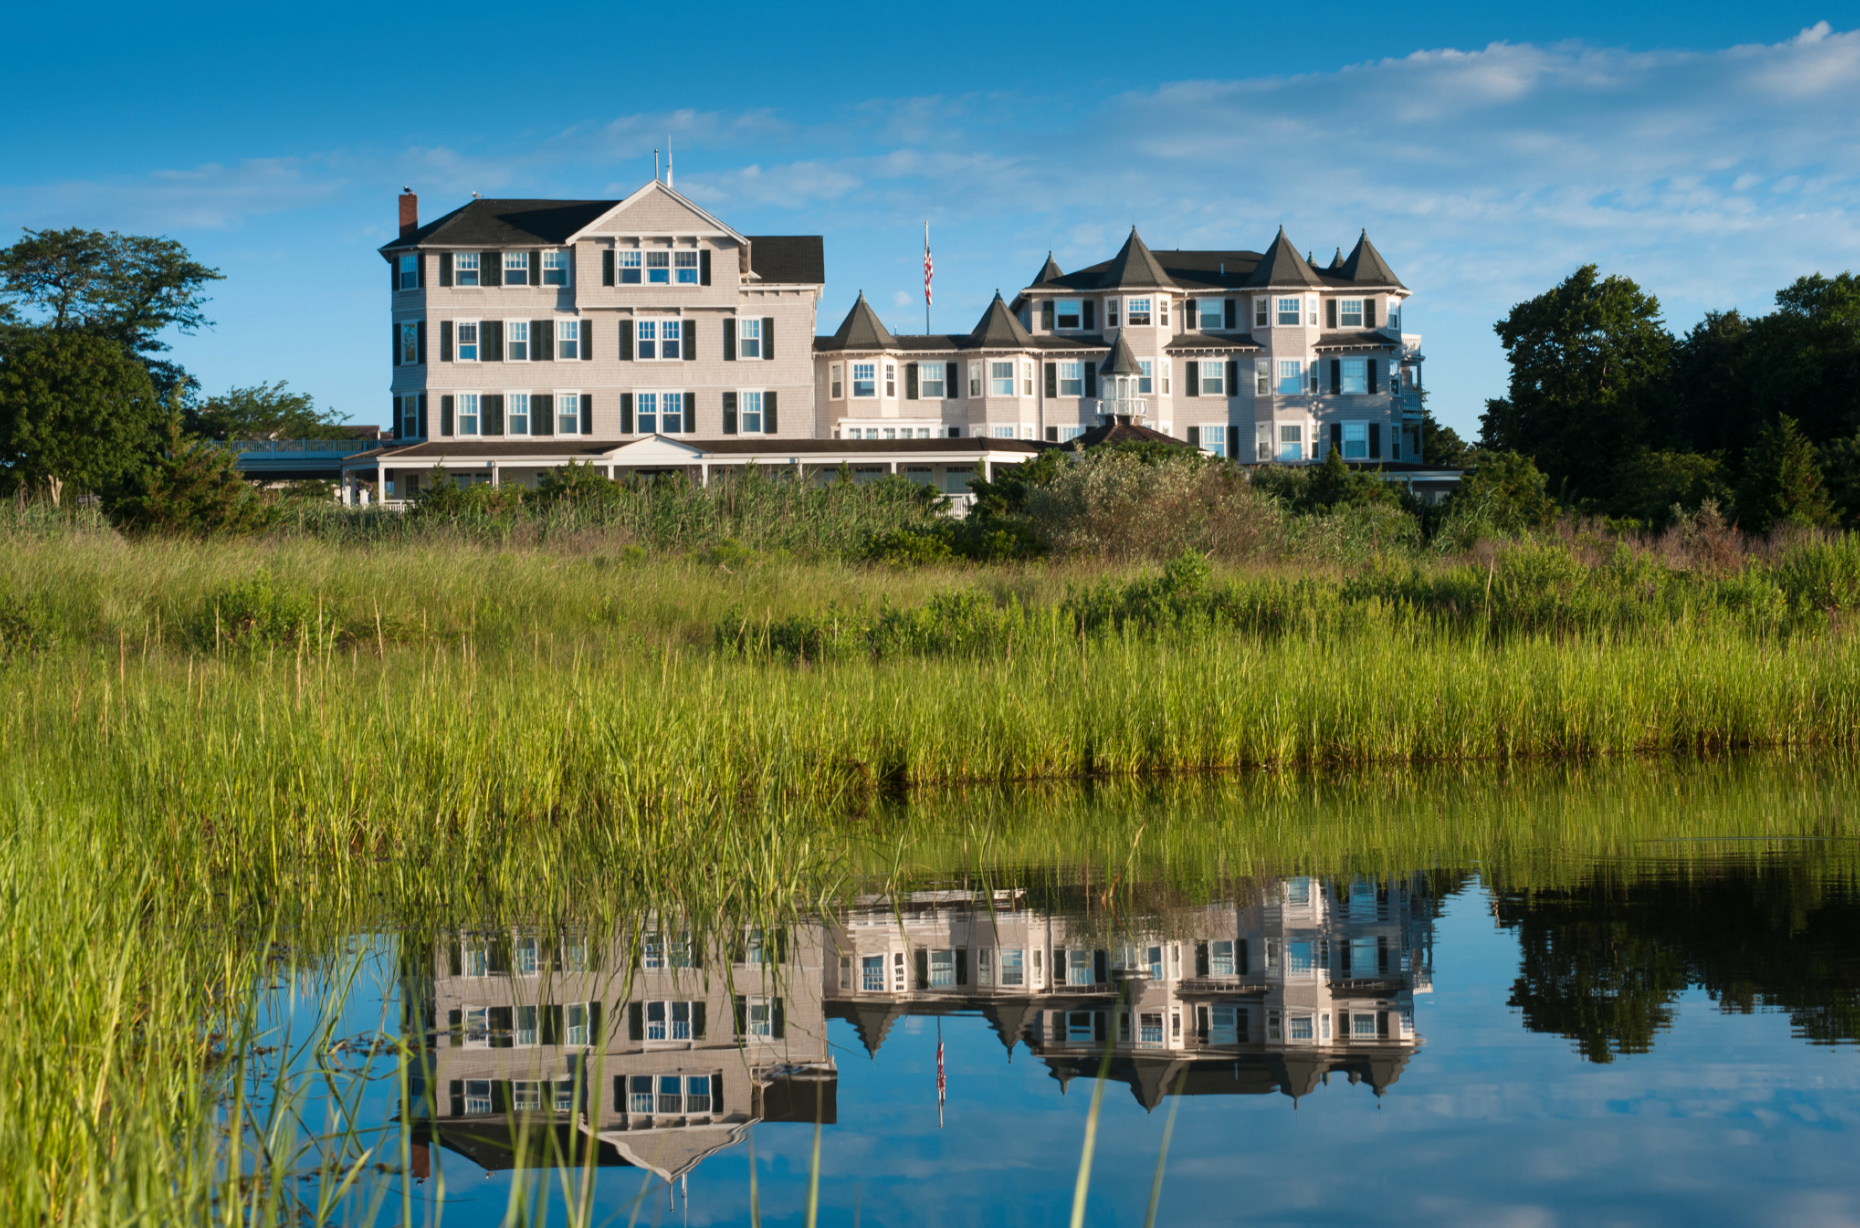 We Found Low-Key Mini Moon Bliss — And Some History — In This Martha’s Vineyard Town
